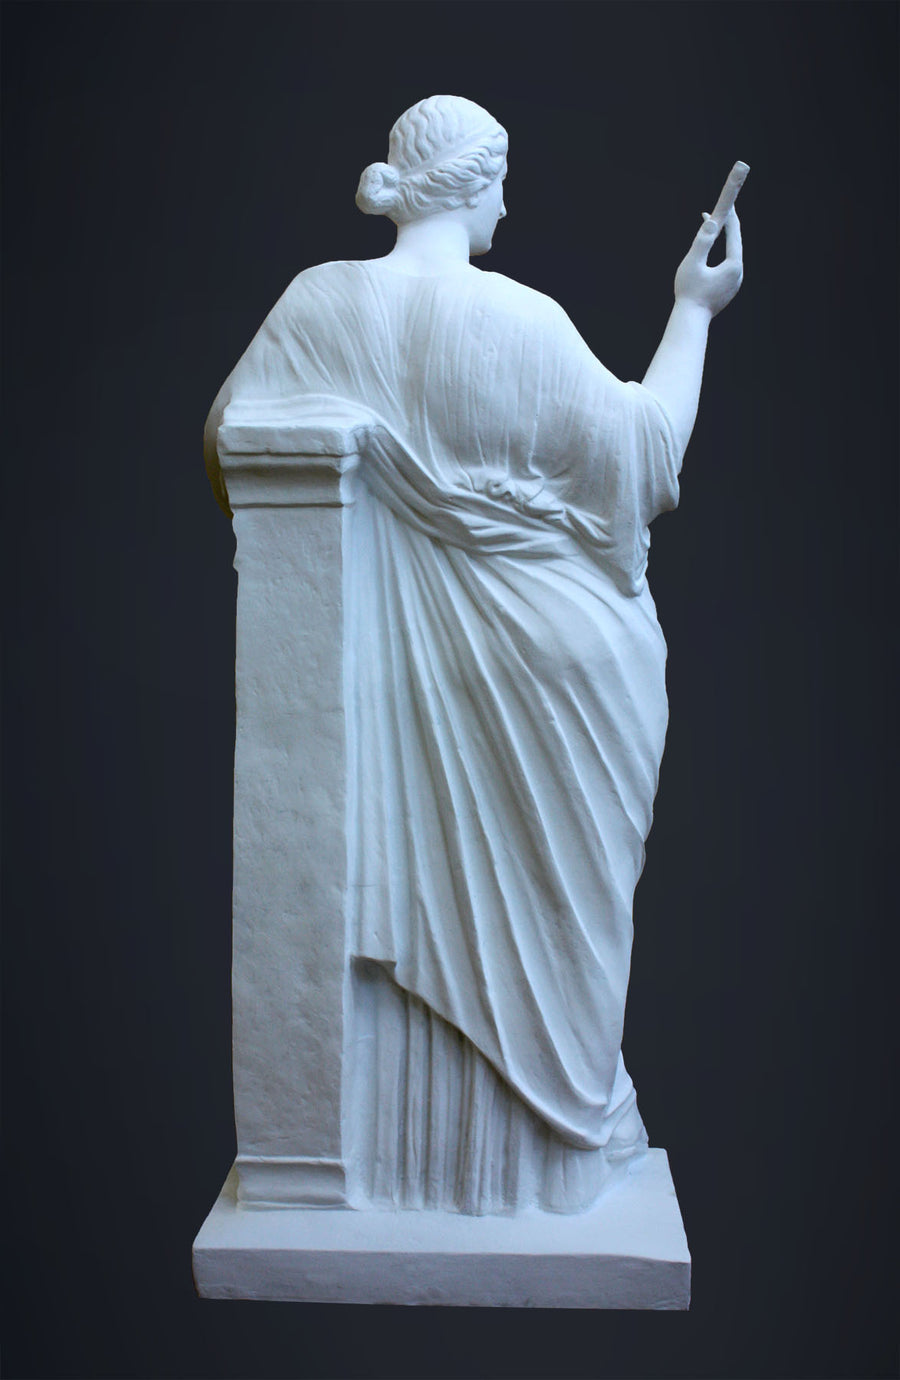 photo of plaster cast sculpture of female figure in robes leaning on podium